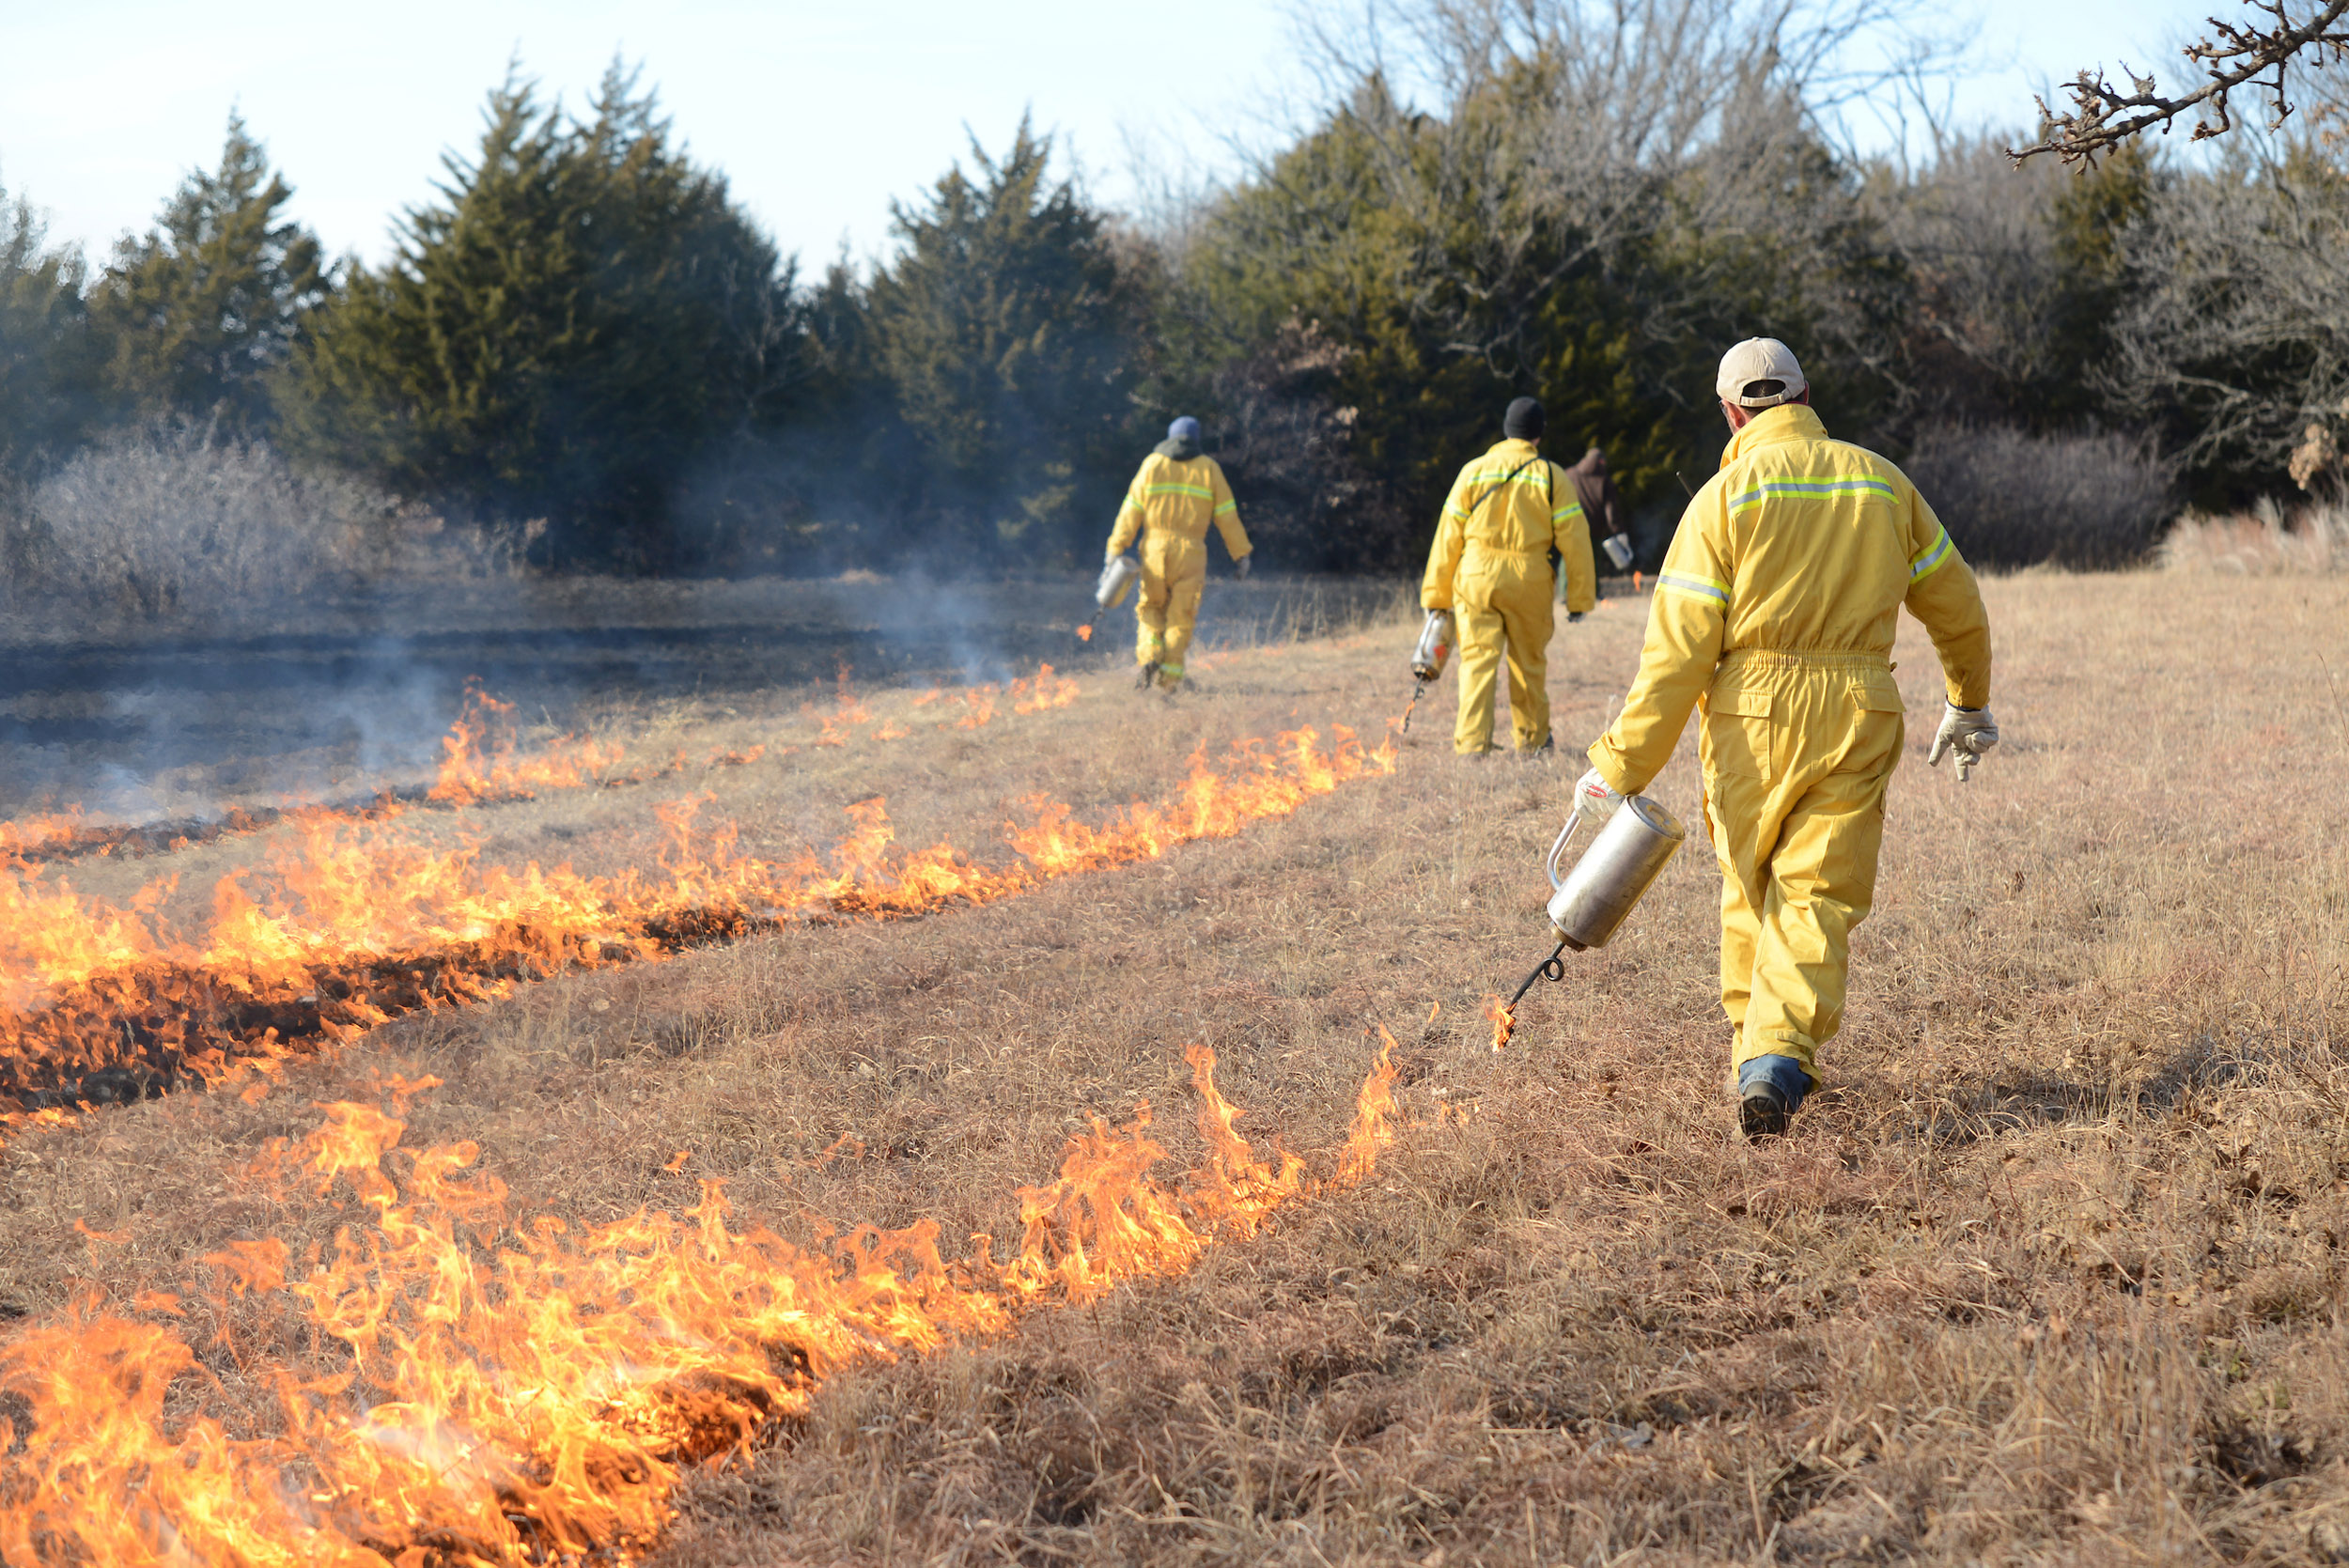 Crews lighting scrubland on fire for controlled burns